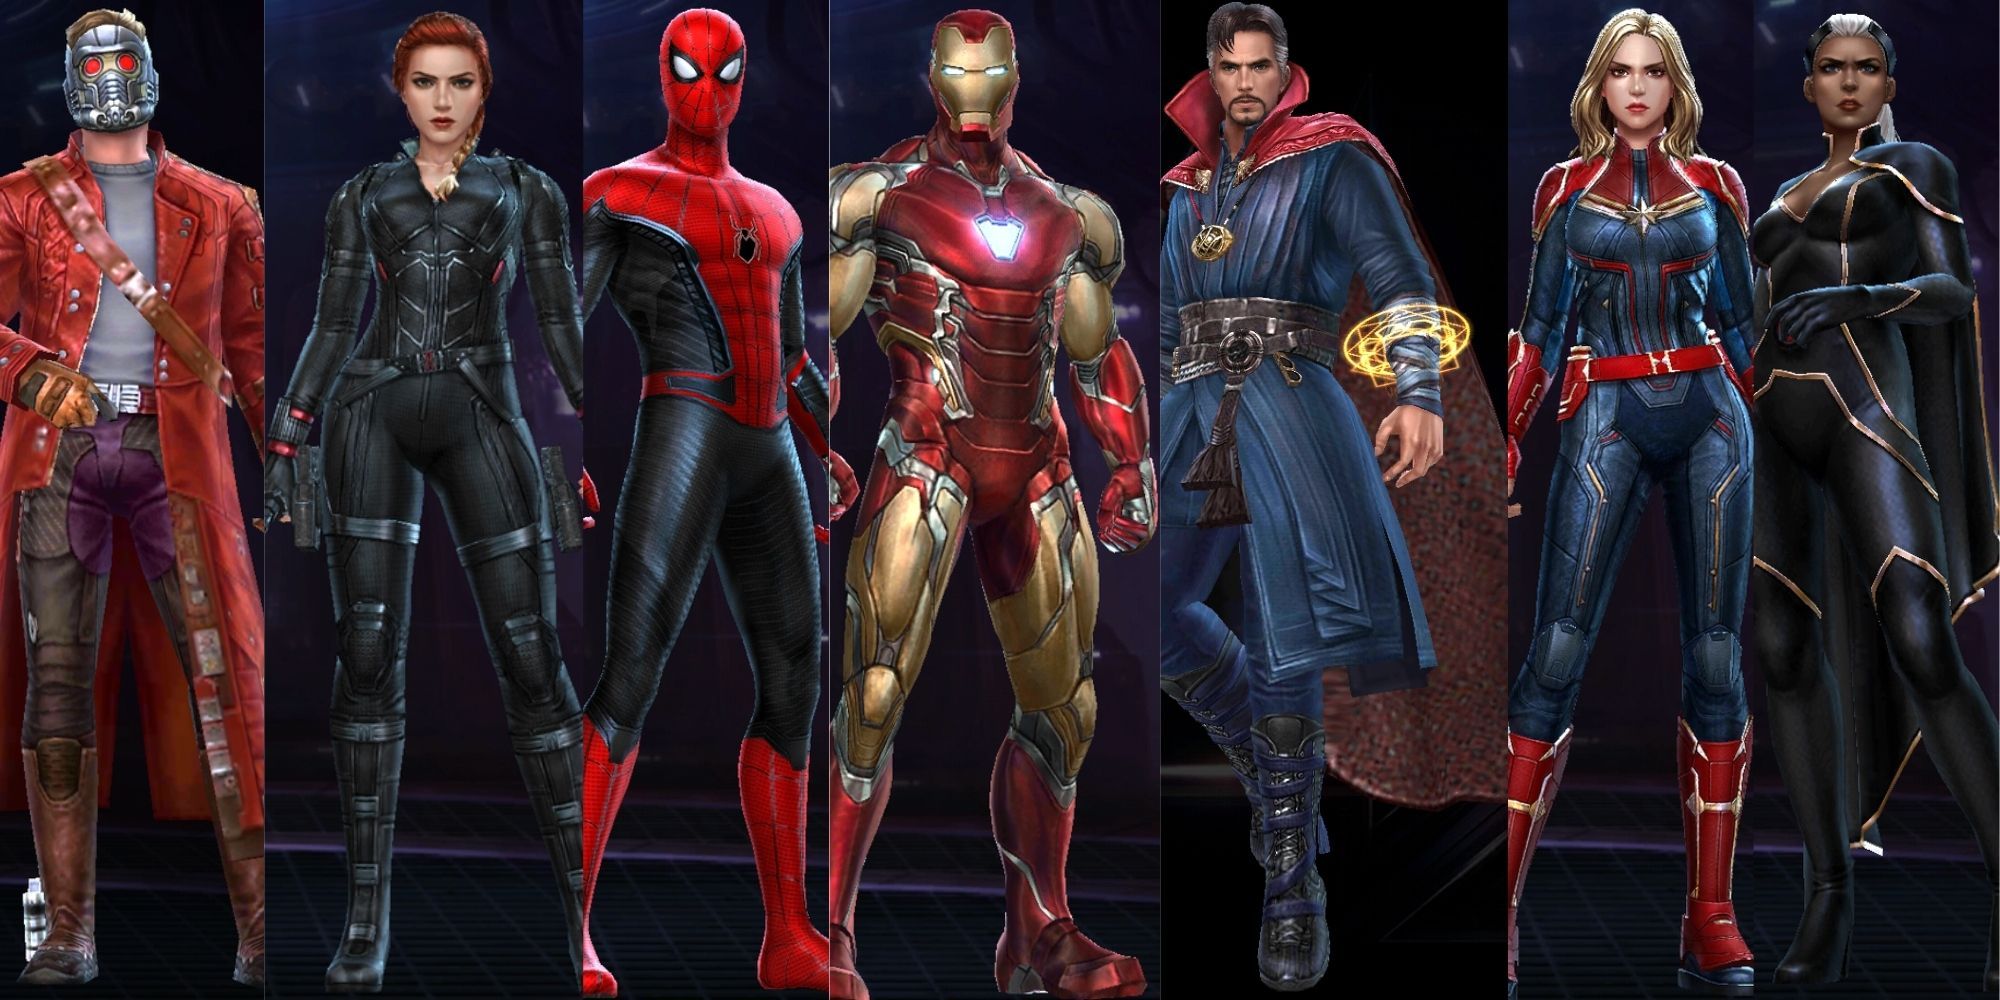 Split images of characters from Marvel Future Revolution, showing Star-Lord, Black Widow, Spider-Man, Iron Man, Doctor Strange, Captain Marvel, and Storm.